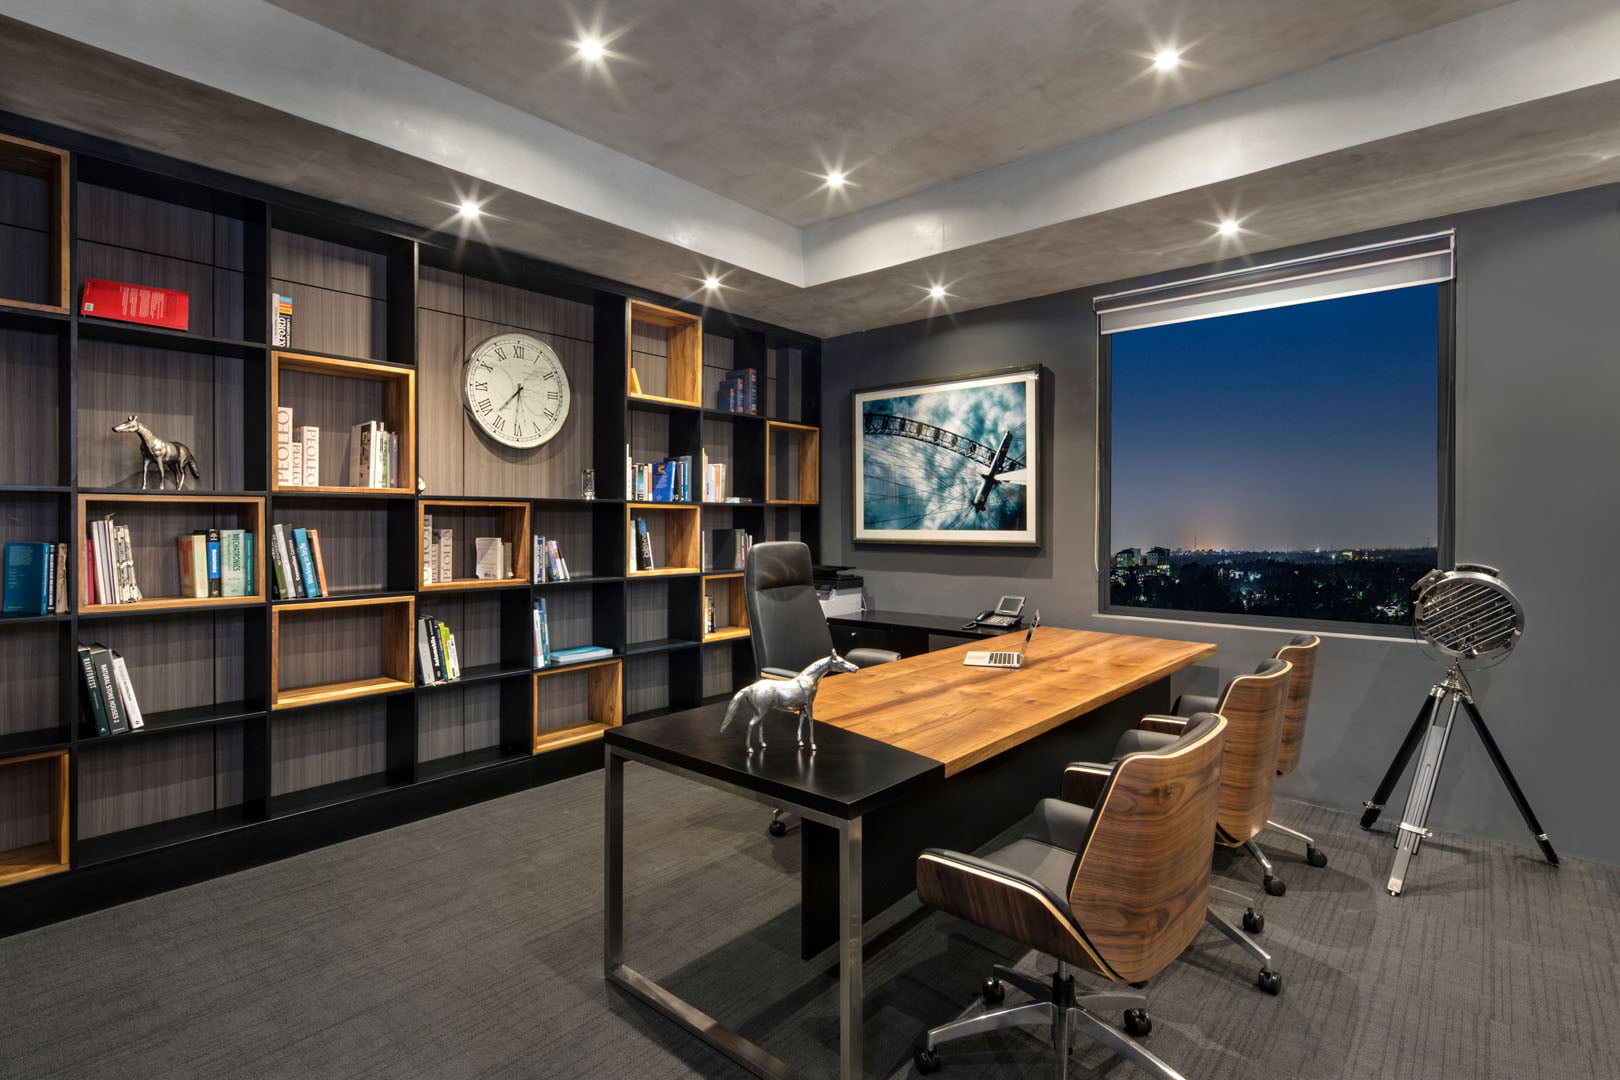 Personalized Office Space Image 14 | Customized Office Interior Designing